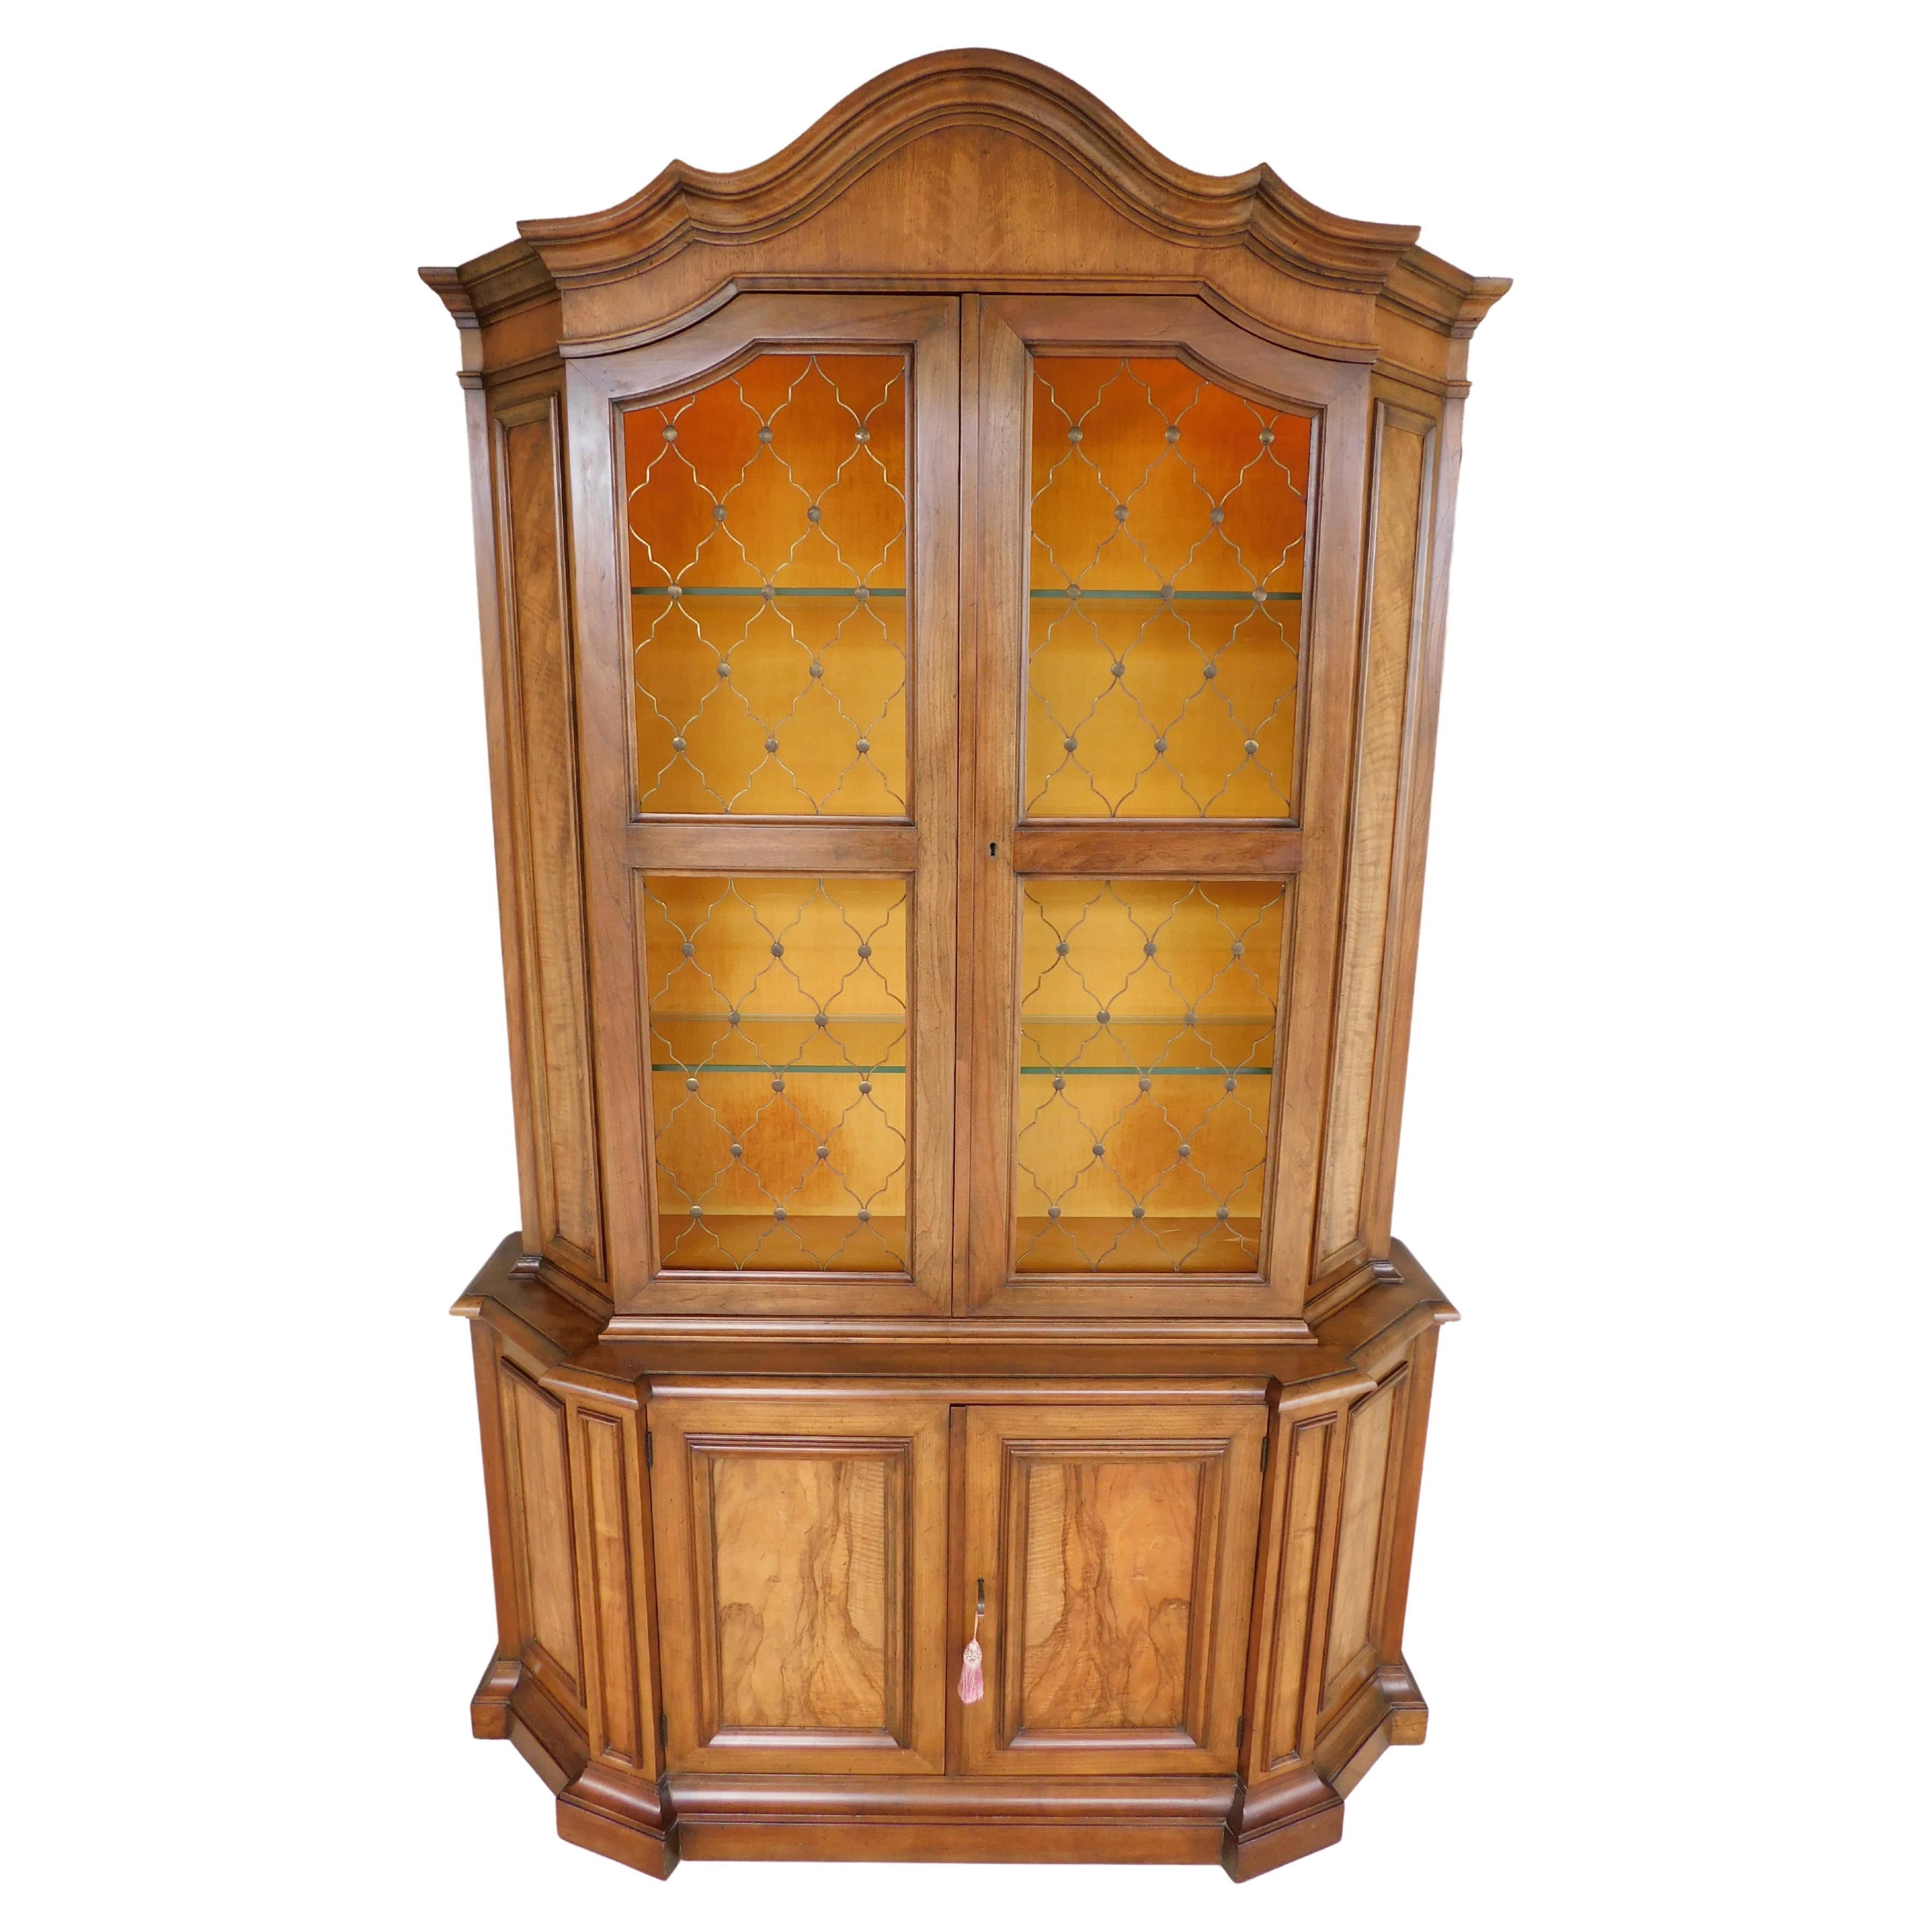 Midcentury French Regency Style Baker Furniture Lighted Display Cabinet